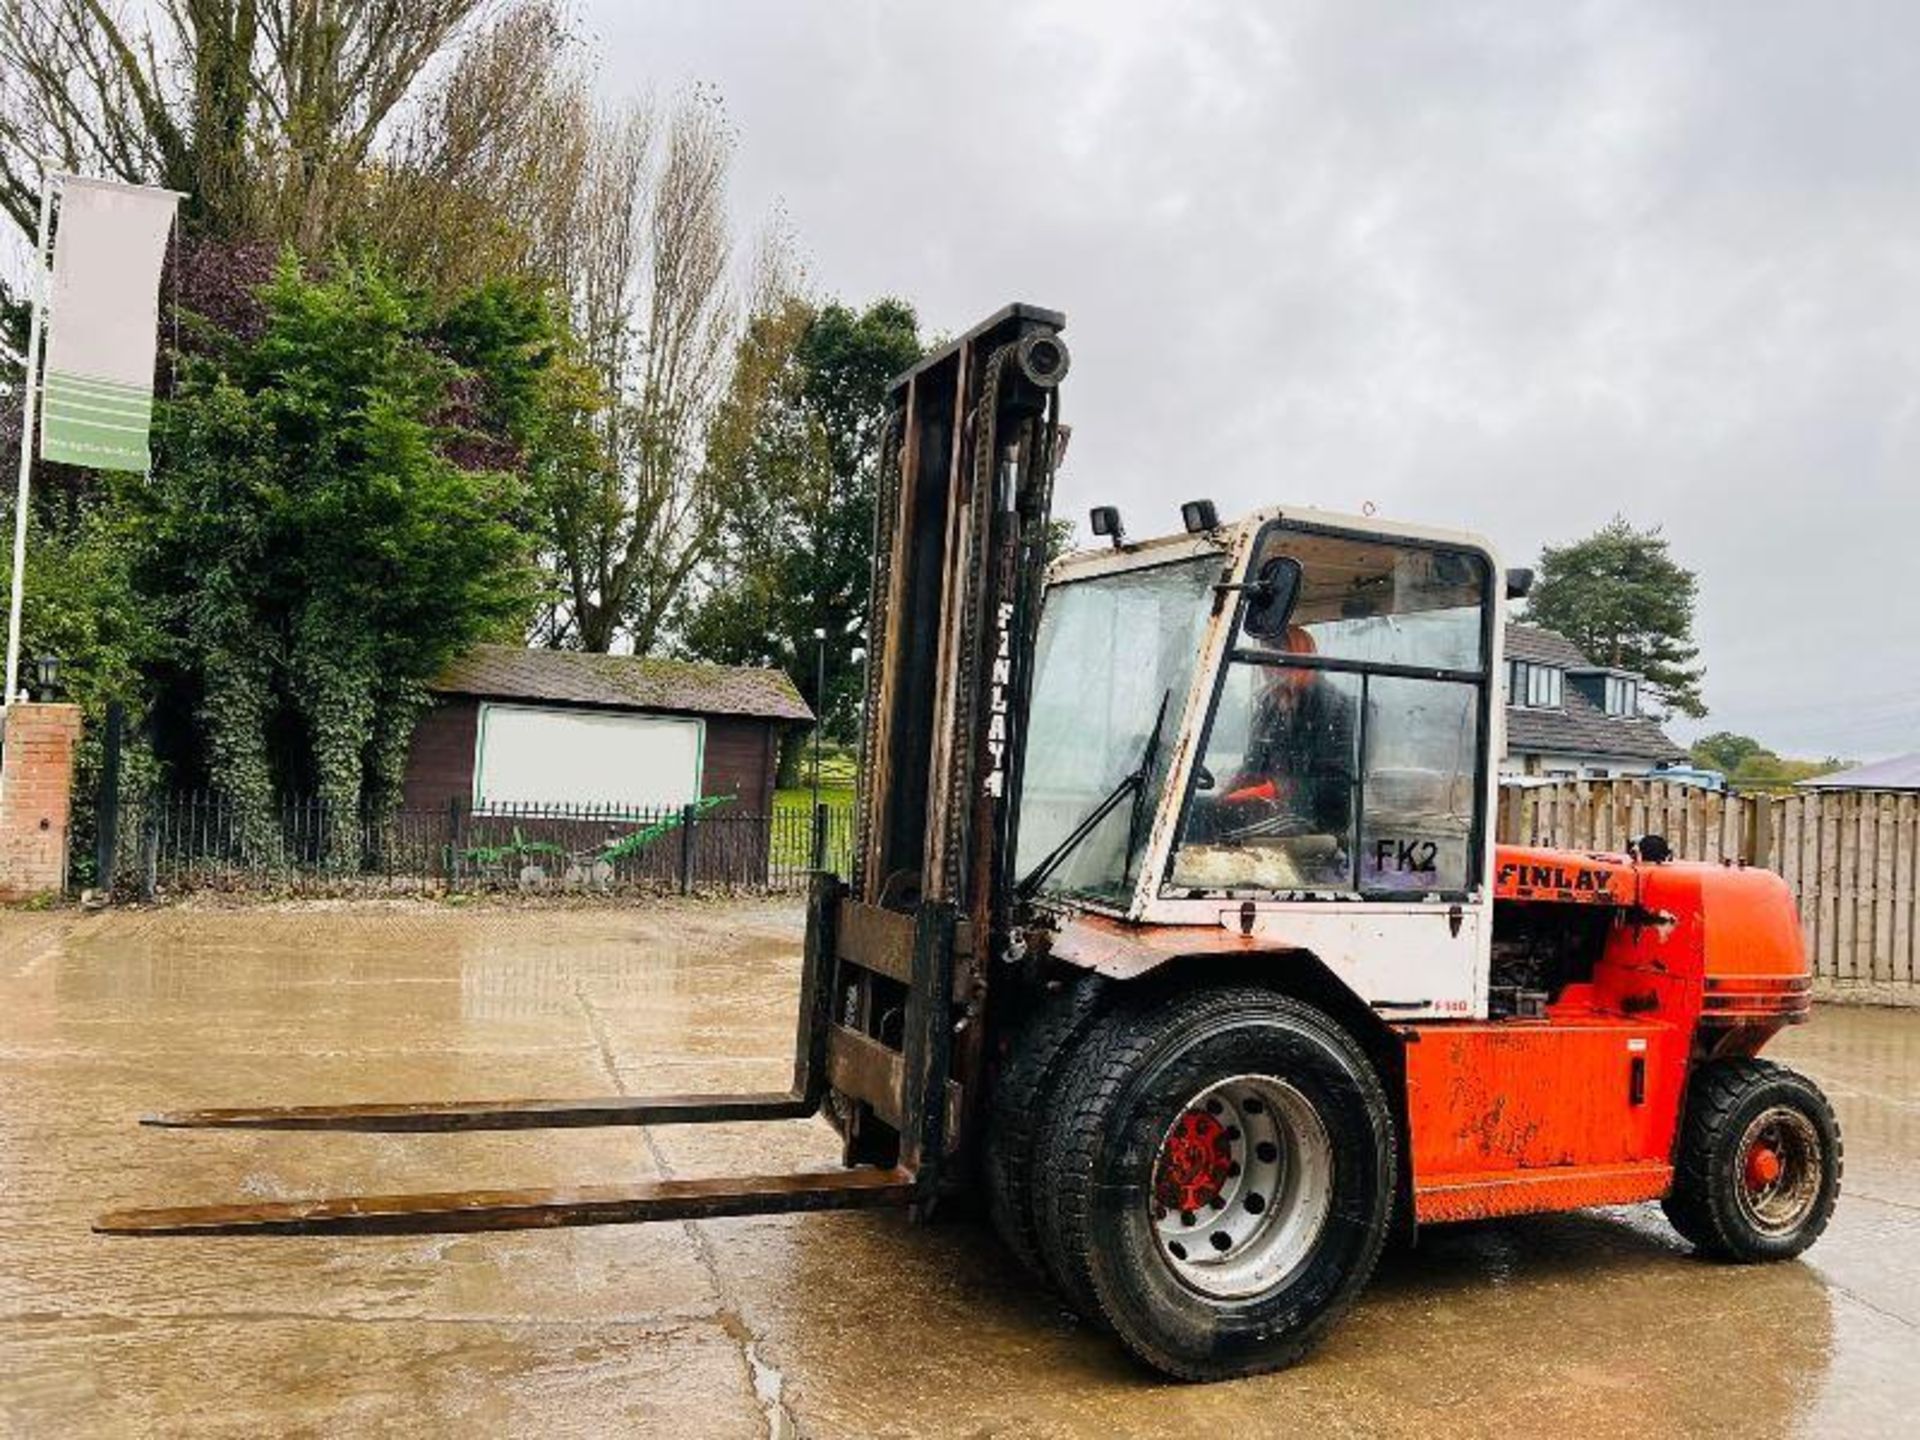 FINLAY F140 ROUGH FORKLIFT C/W 2M LONG TINES & 3 X AUXILARY LINES  - Bild 2 aus 11